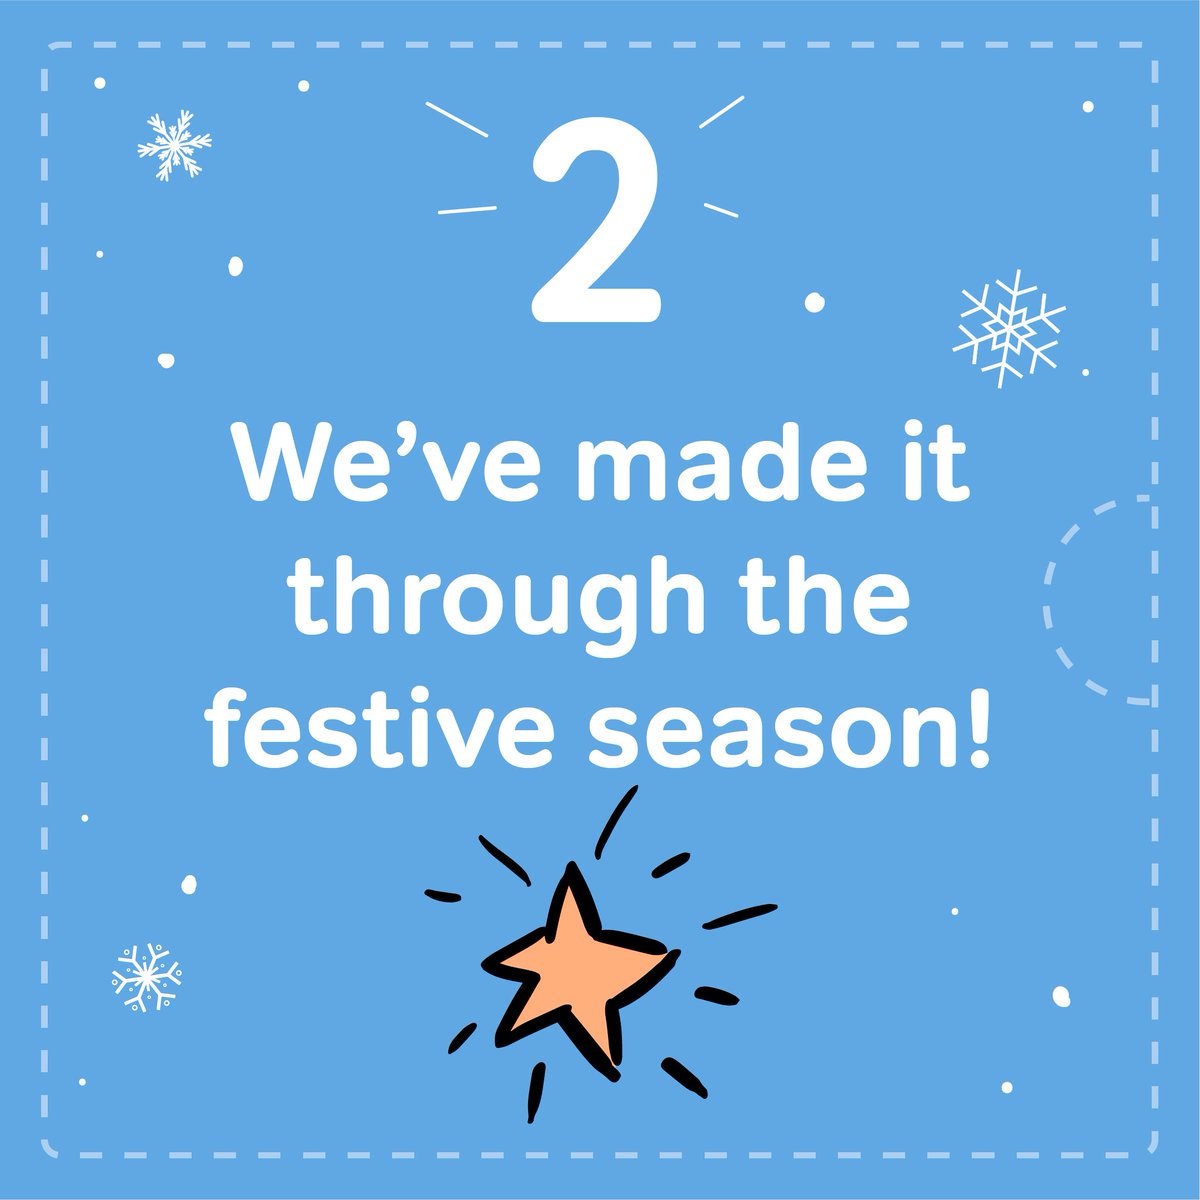 It’s 2 January, the end of our #MindWellAdventCalendar. It’s another #BankHoliday, so take time for #SelfCare, plan new ways to look after yourself & try to look forward to the month ahead. Explore #MindWell for ideas: mindwell-leeds.org.uk
#FestiveSeasonYourWay